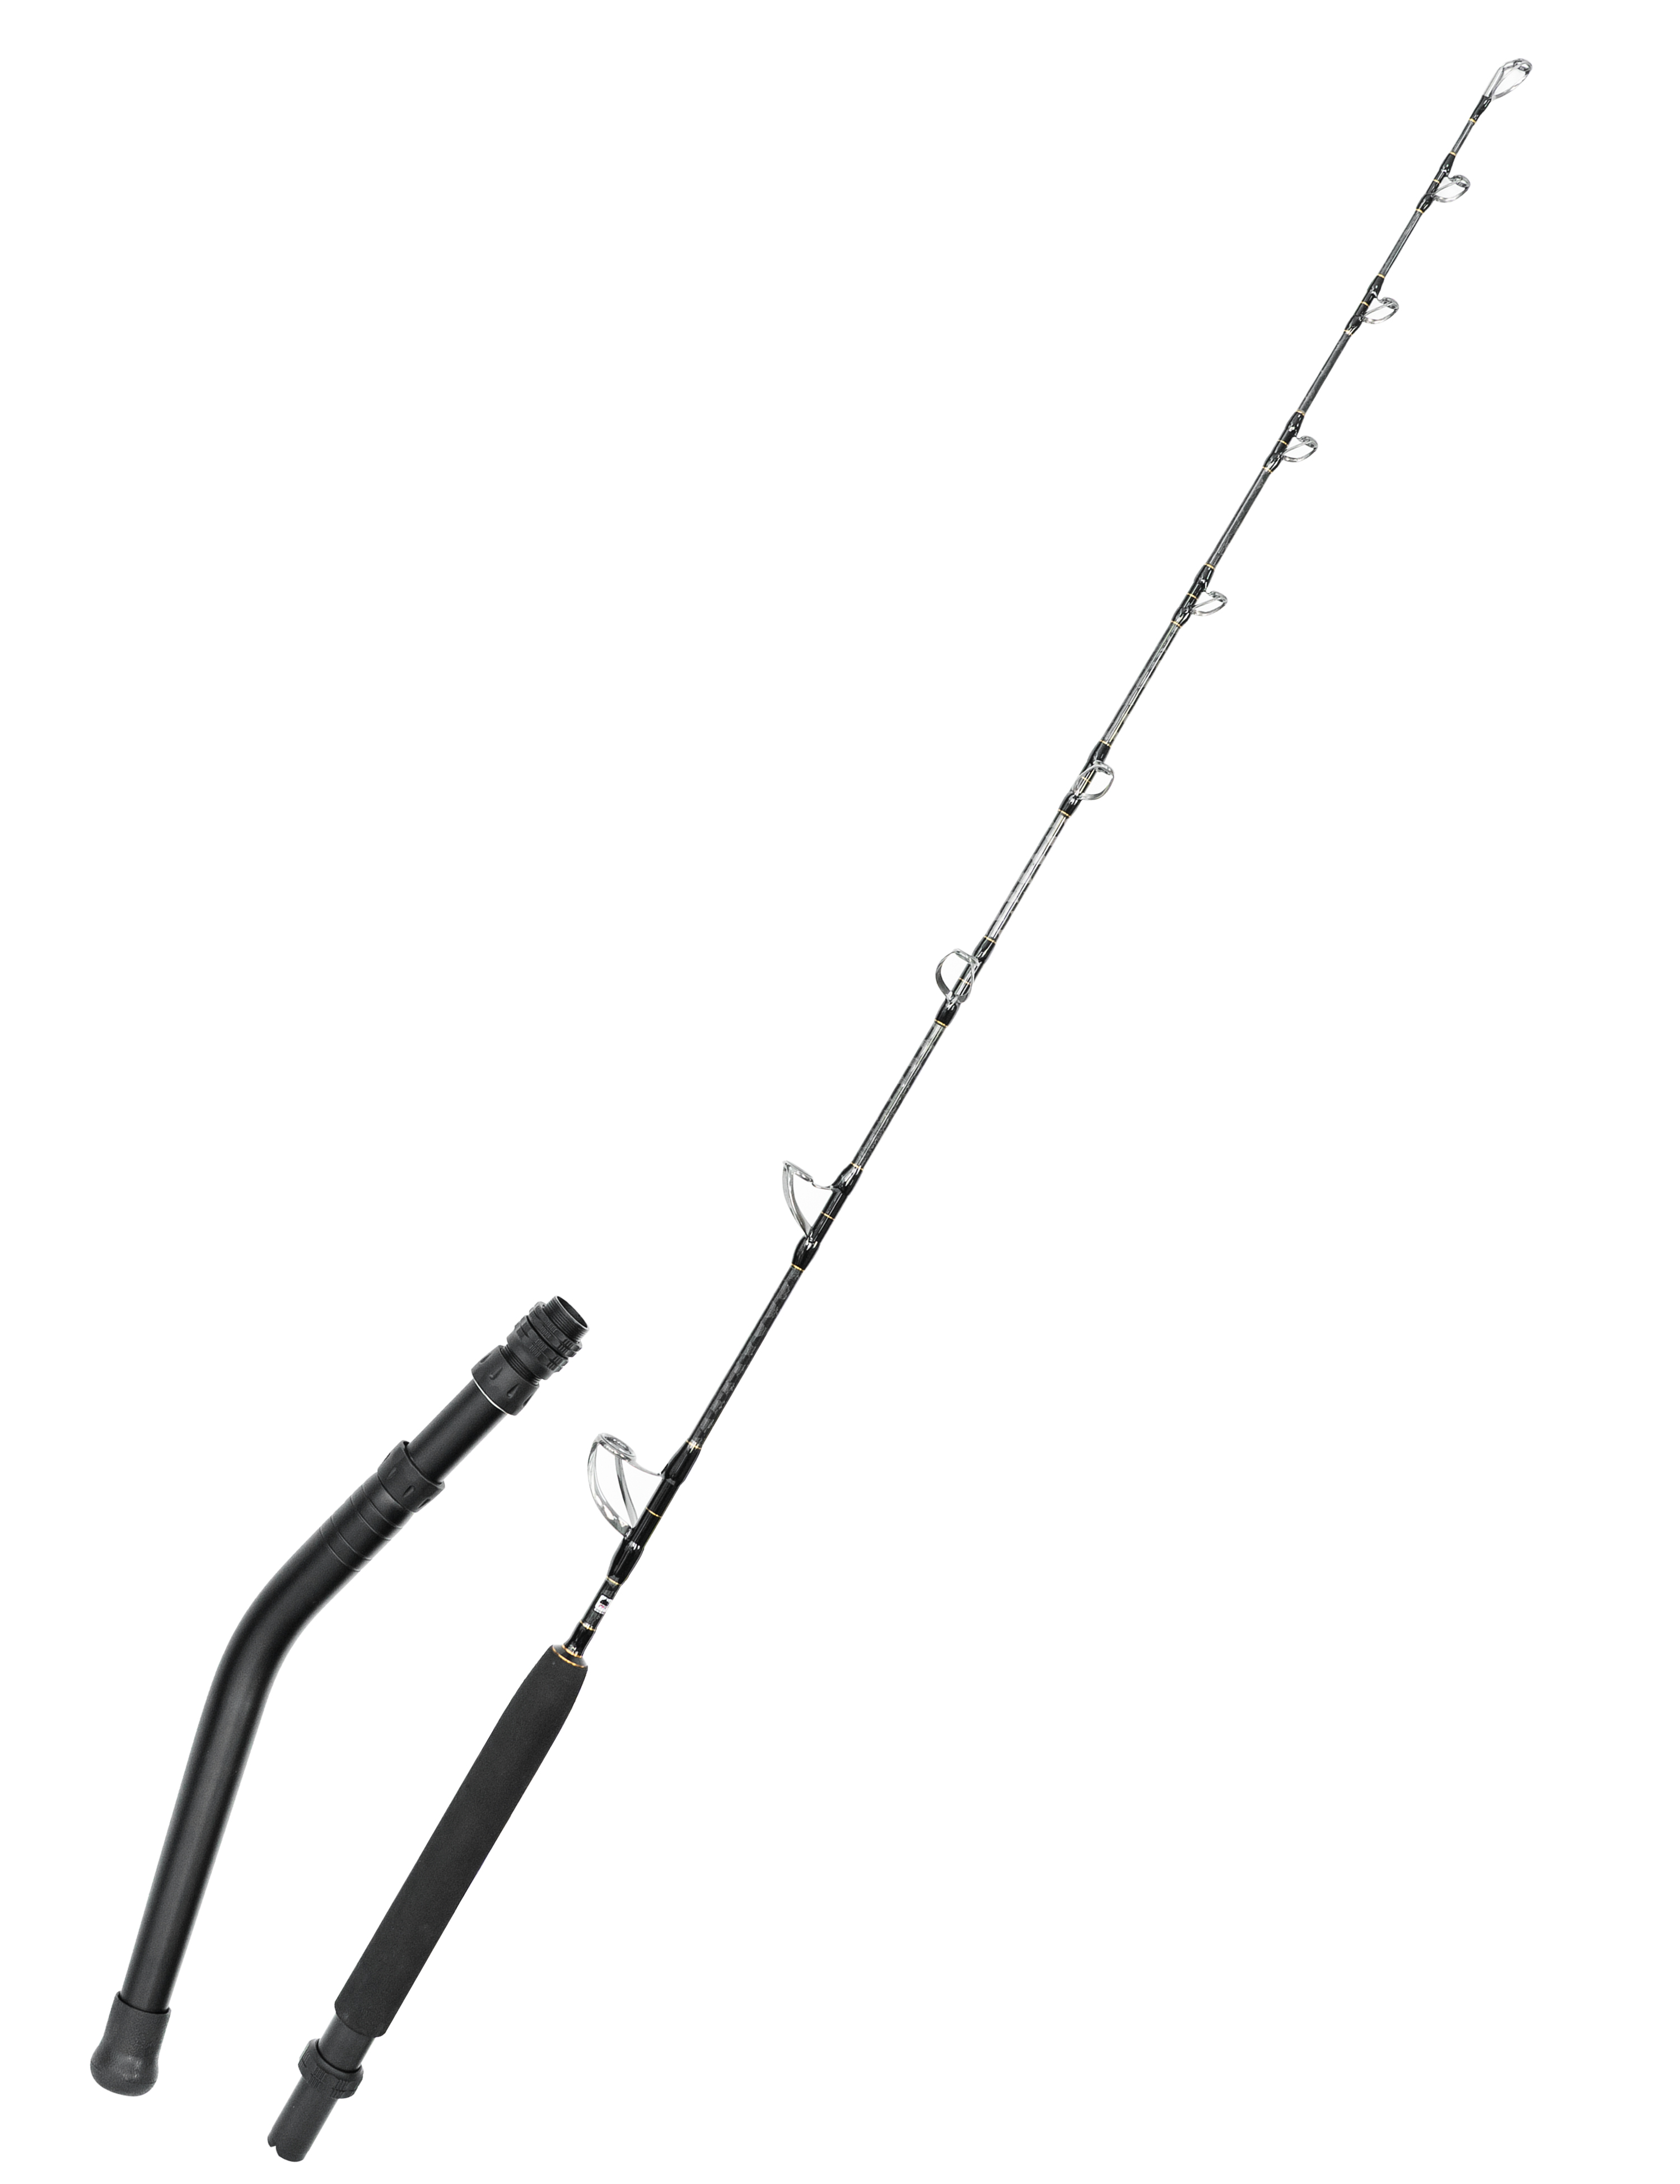 BLUEWING Spiral Wrap Extreme Trolling Rod, 2 Pieces Design